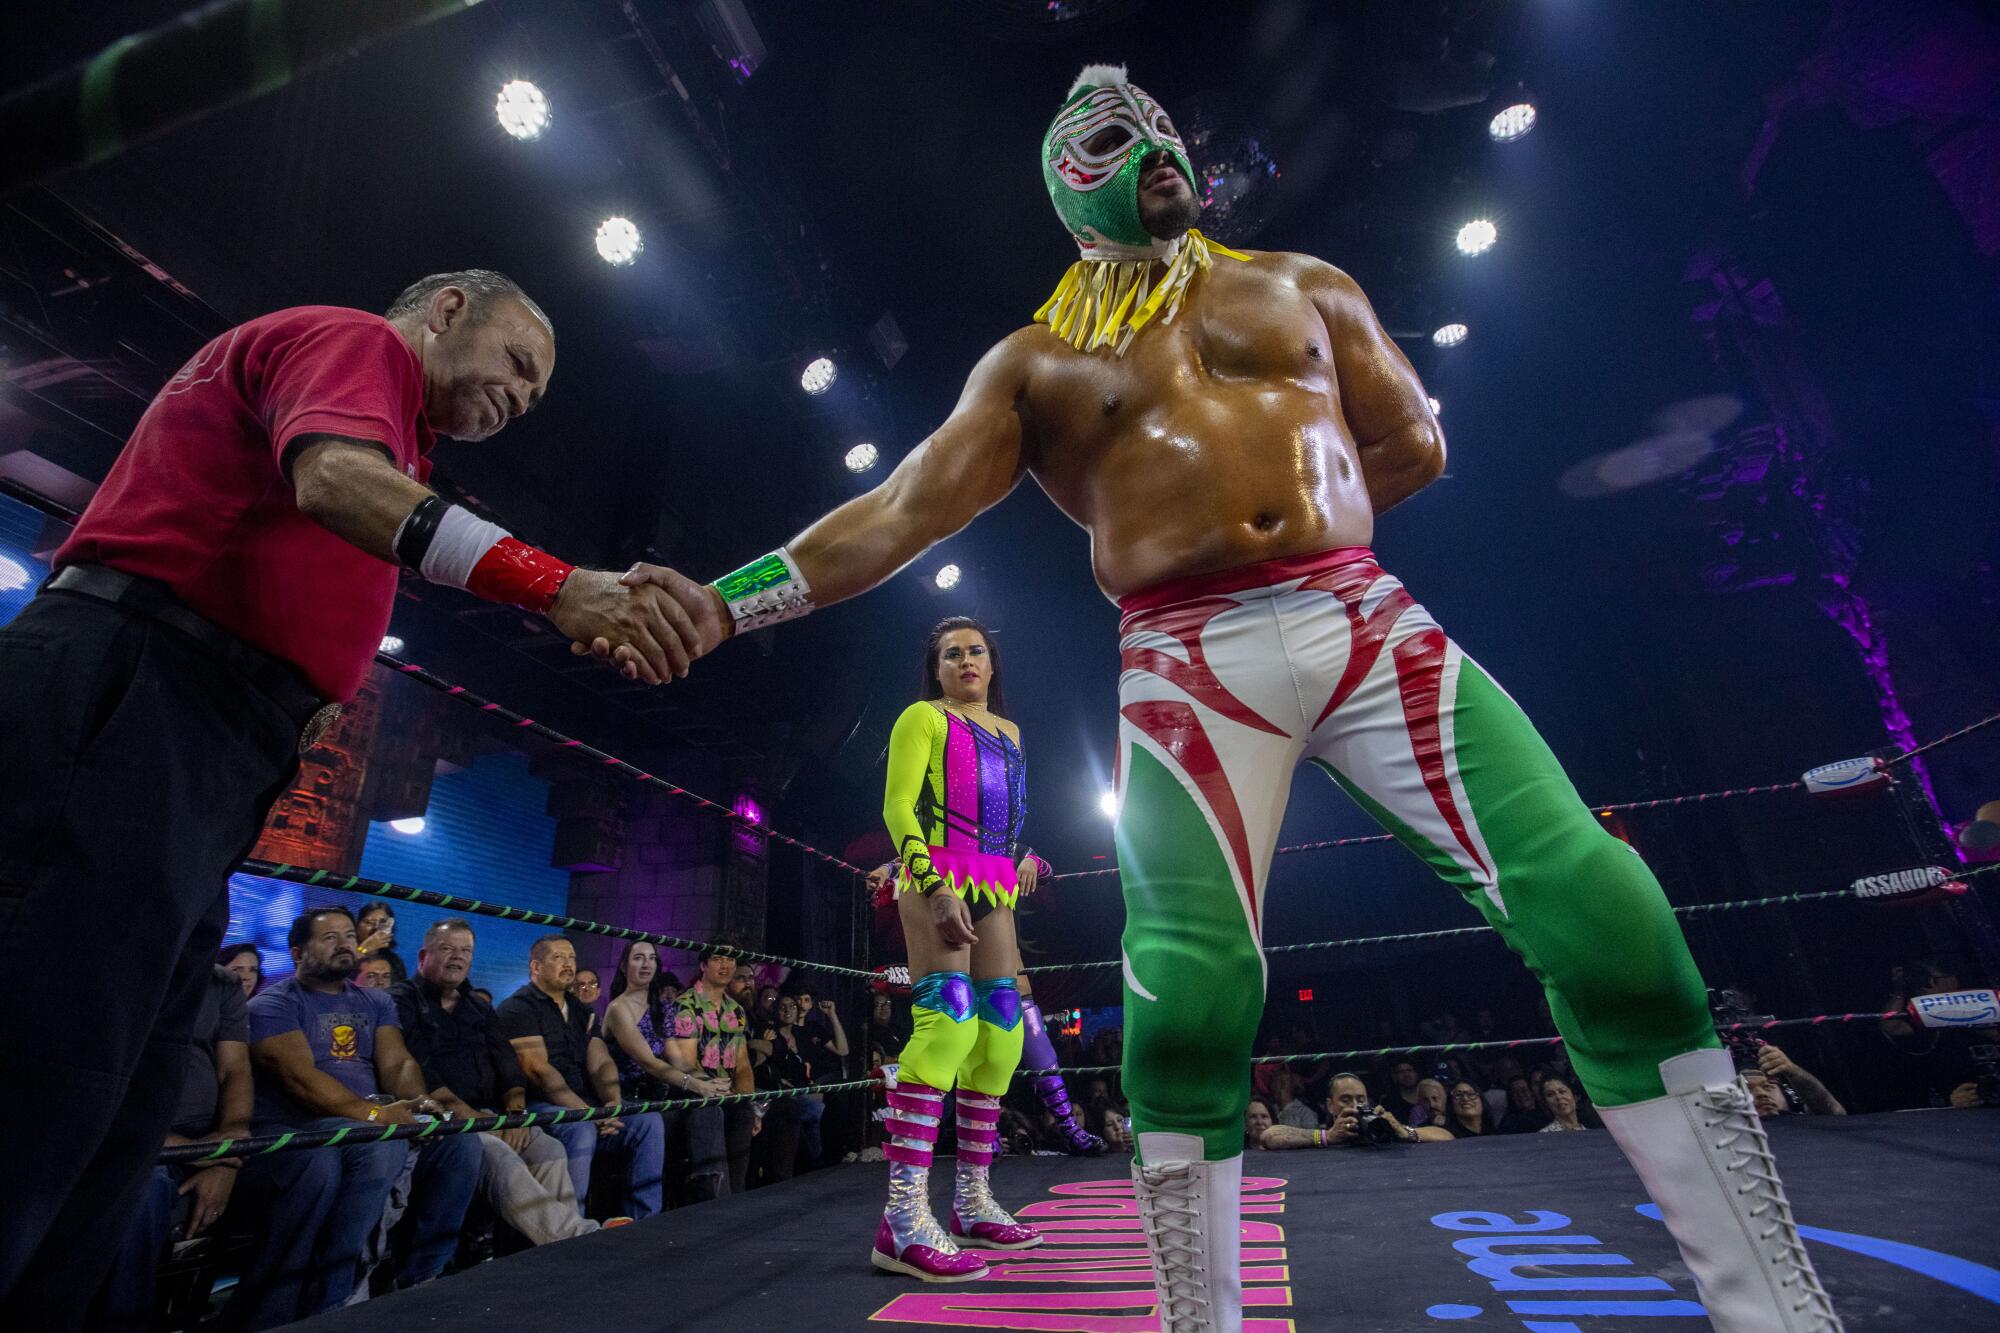 Luchador Misterioso Jr. shakes hands with the ref 